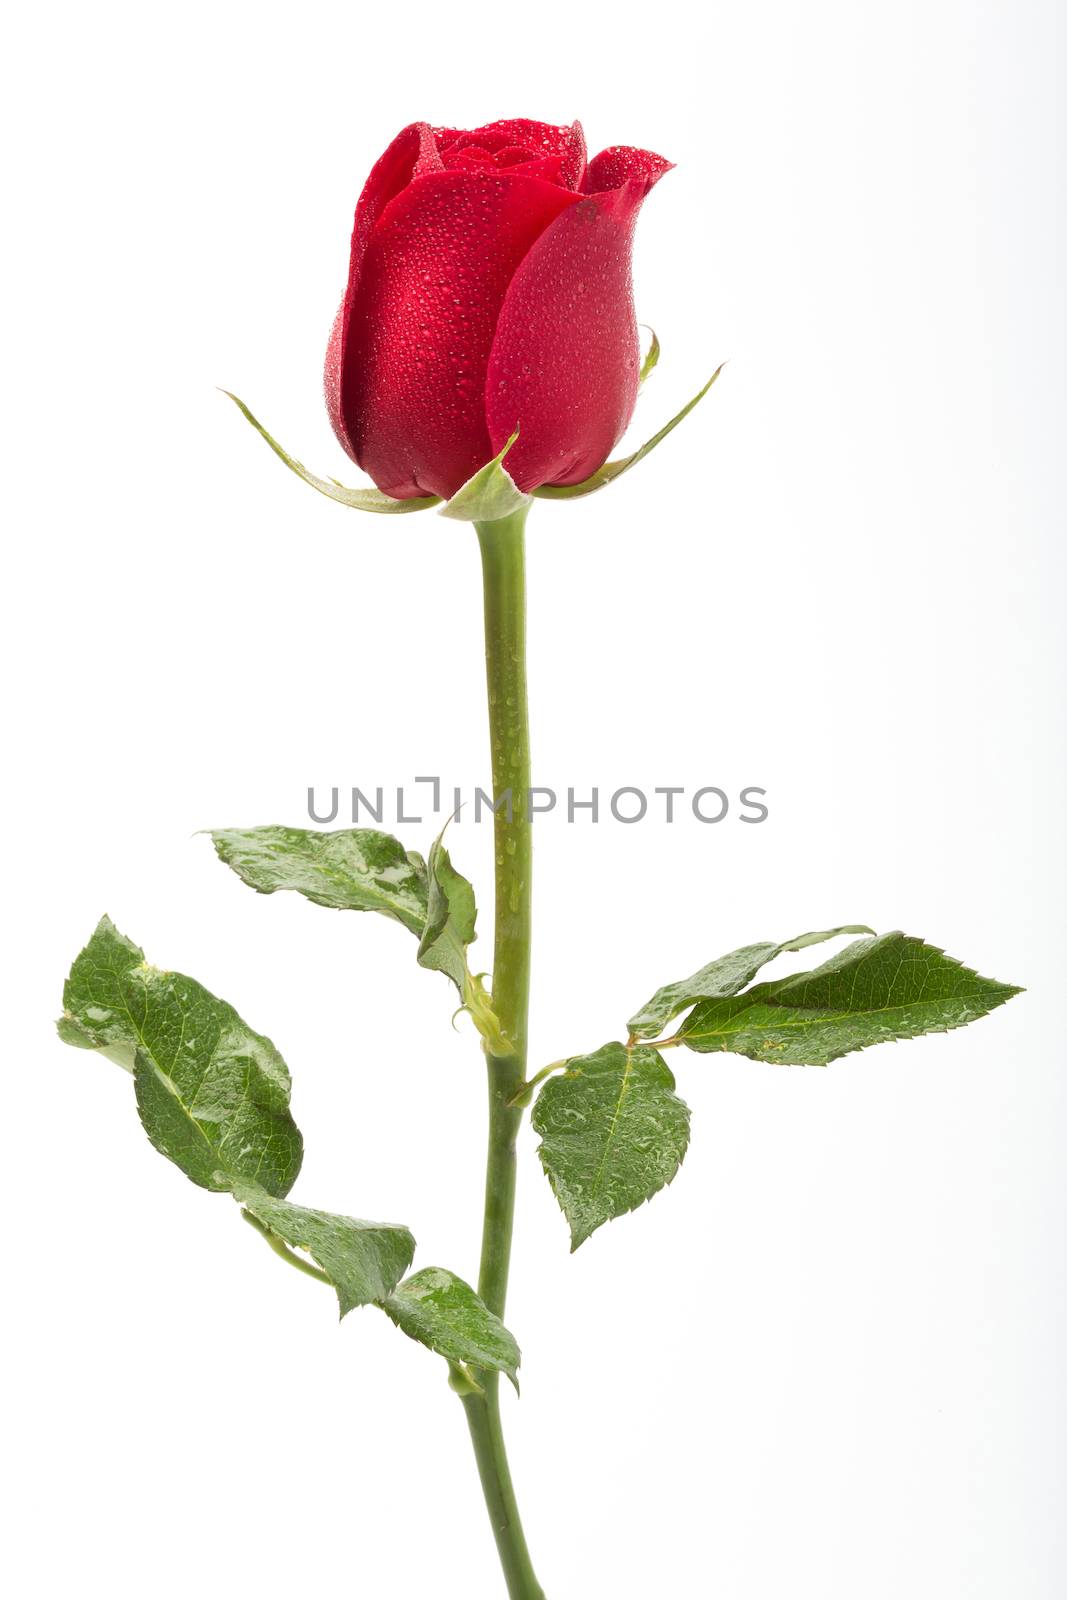 Red rose with water droplet by smuay